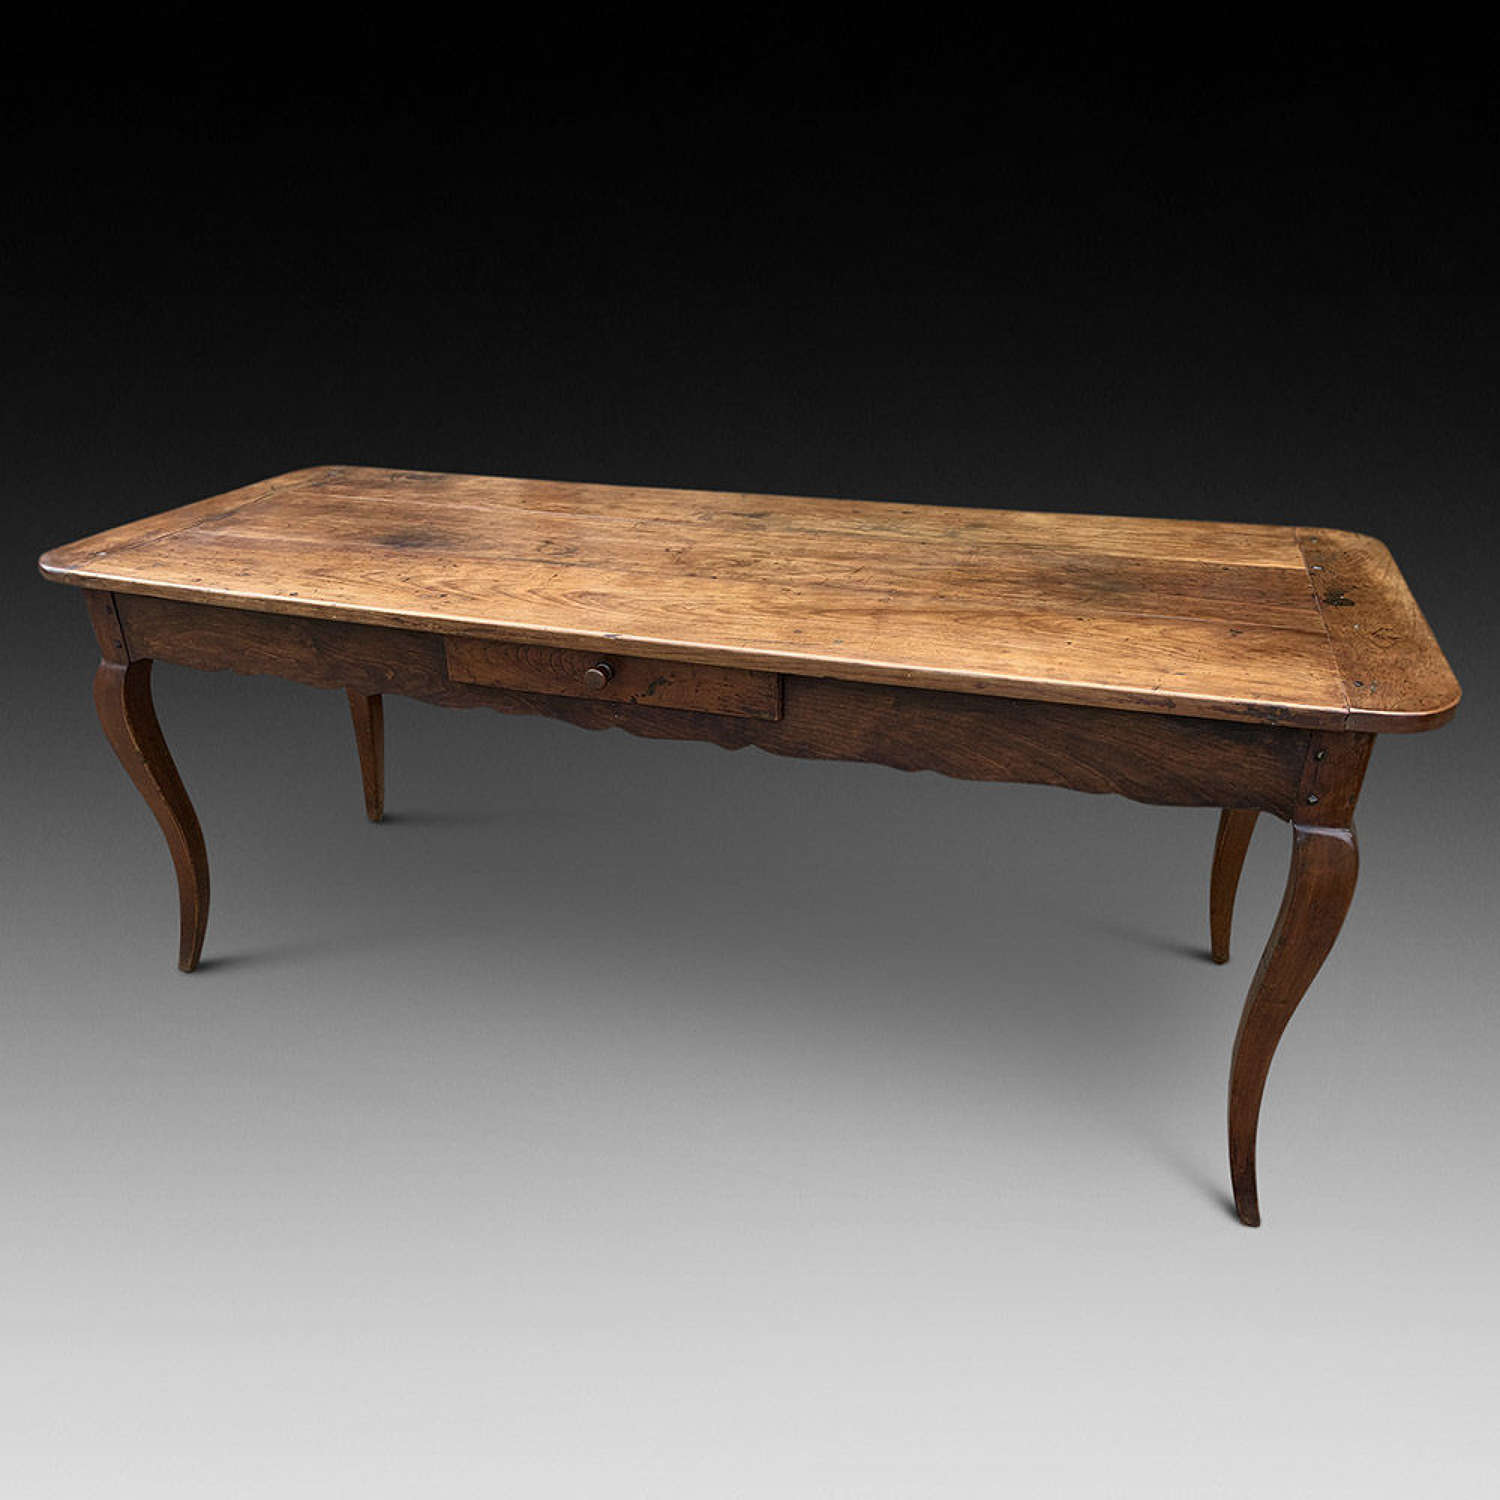 Beautiful and Most Elegant Fruitwood (Cherry) Table c.1830